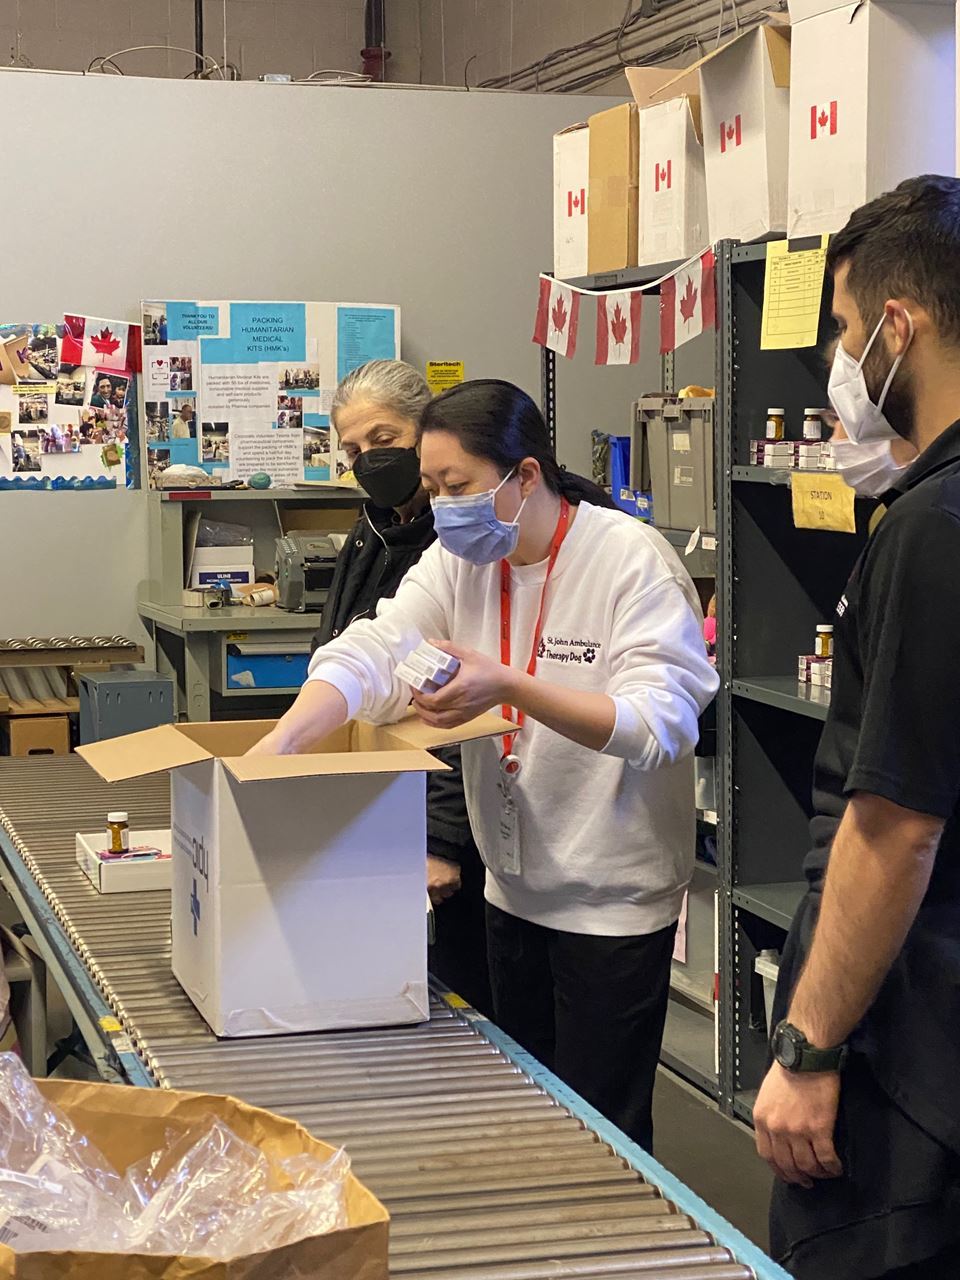 Group of volunteers from St. John Ambulance packing Humanitarian Medical Kits bound for Ukraine, dated April 2, 2022 at HPIC Oakville Distribution Centre. (Source: HPIC)